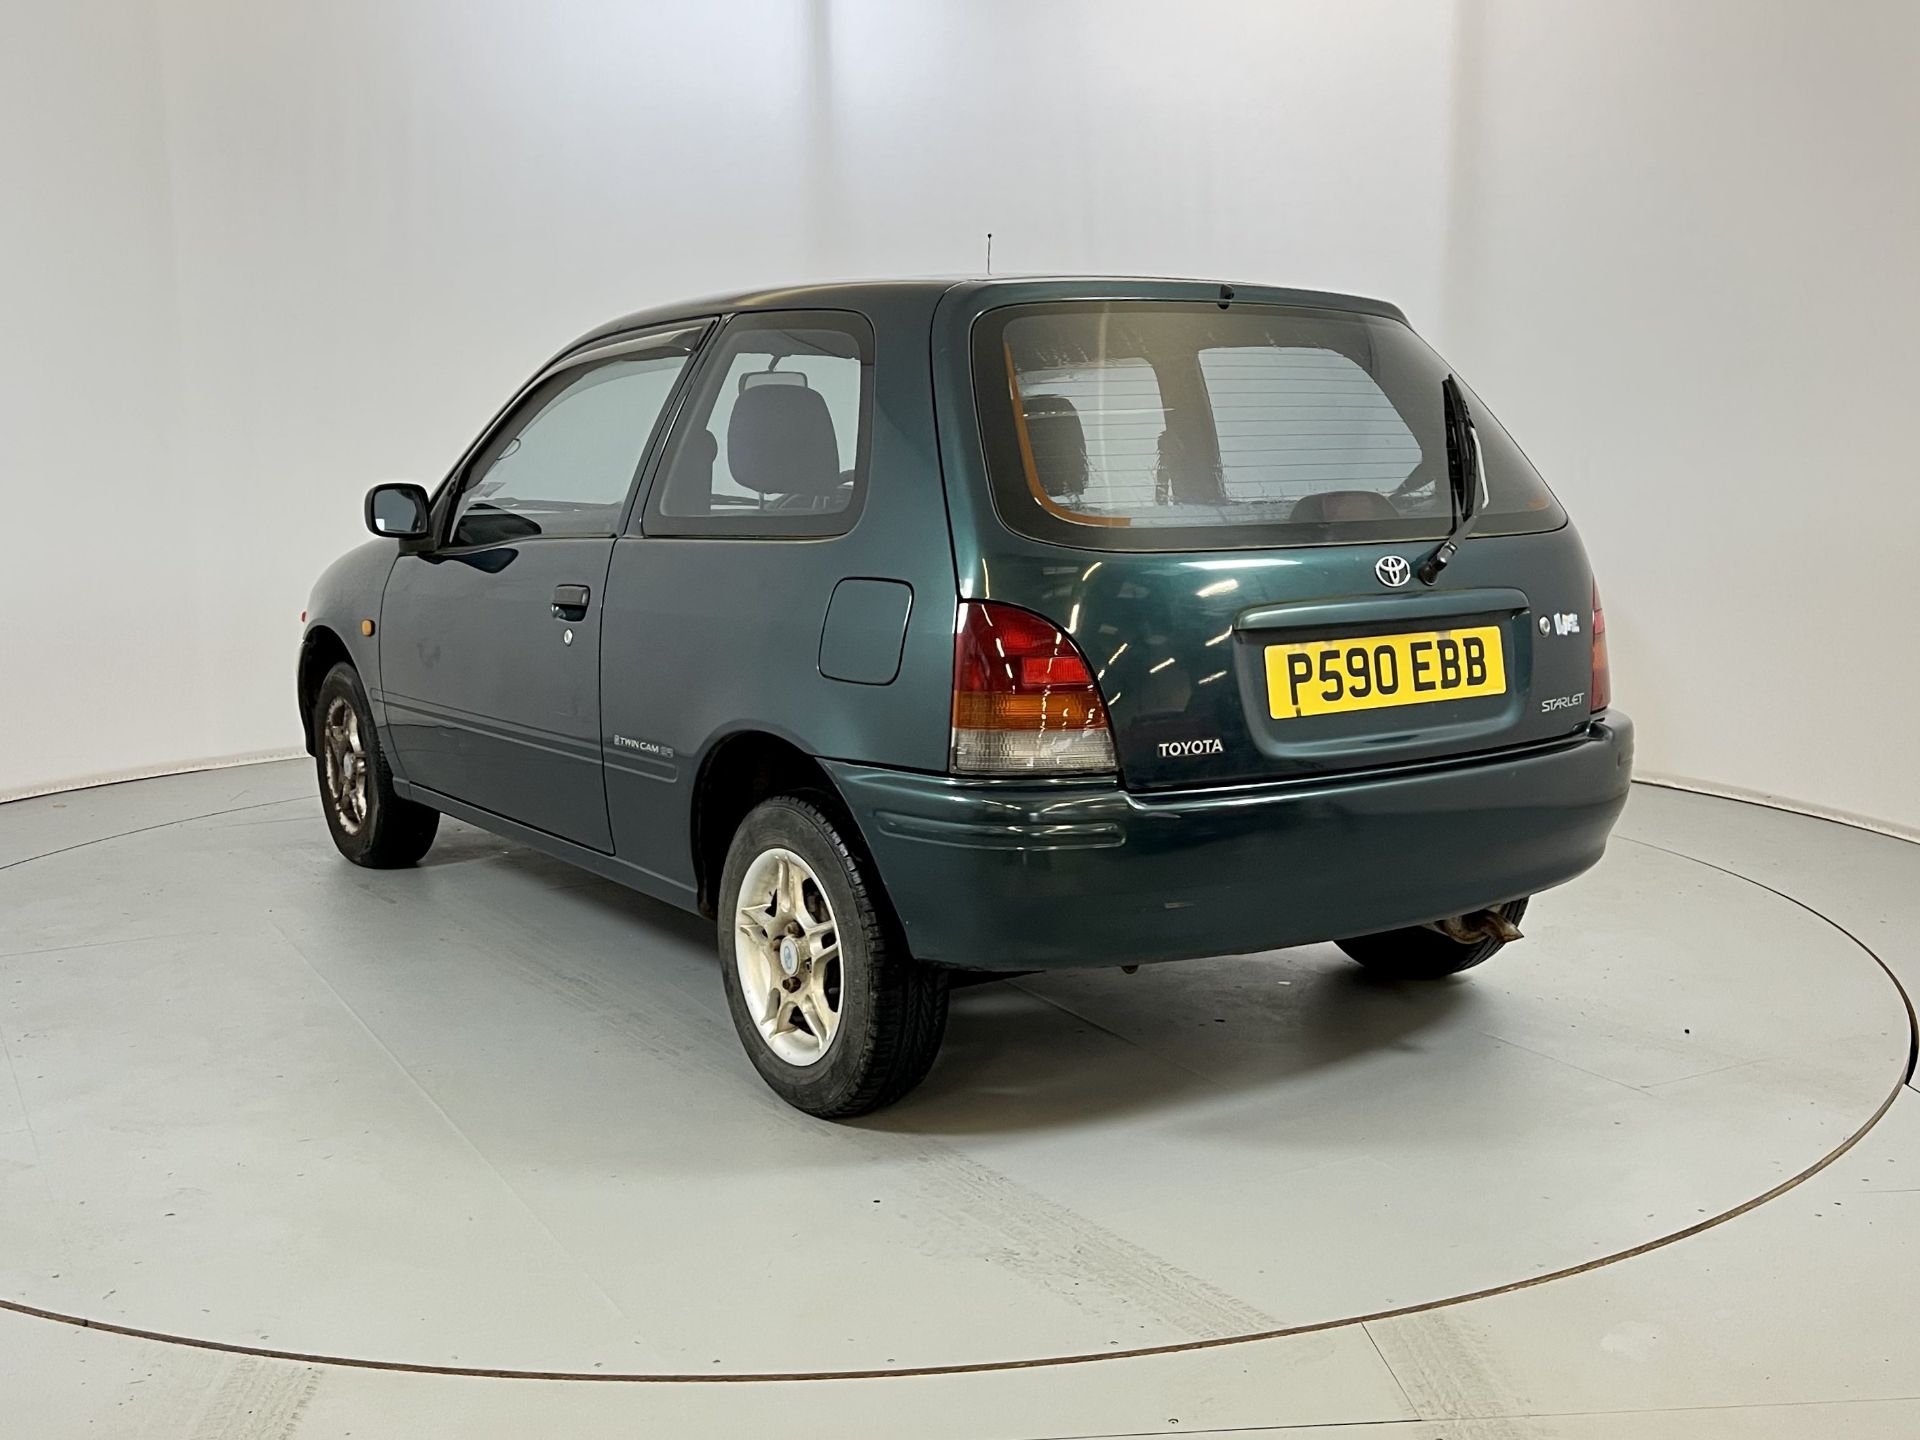 Toyota Starlet - Image 7 of 27